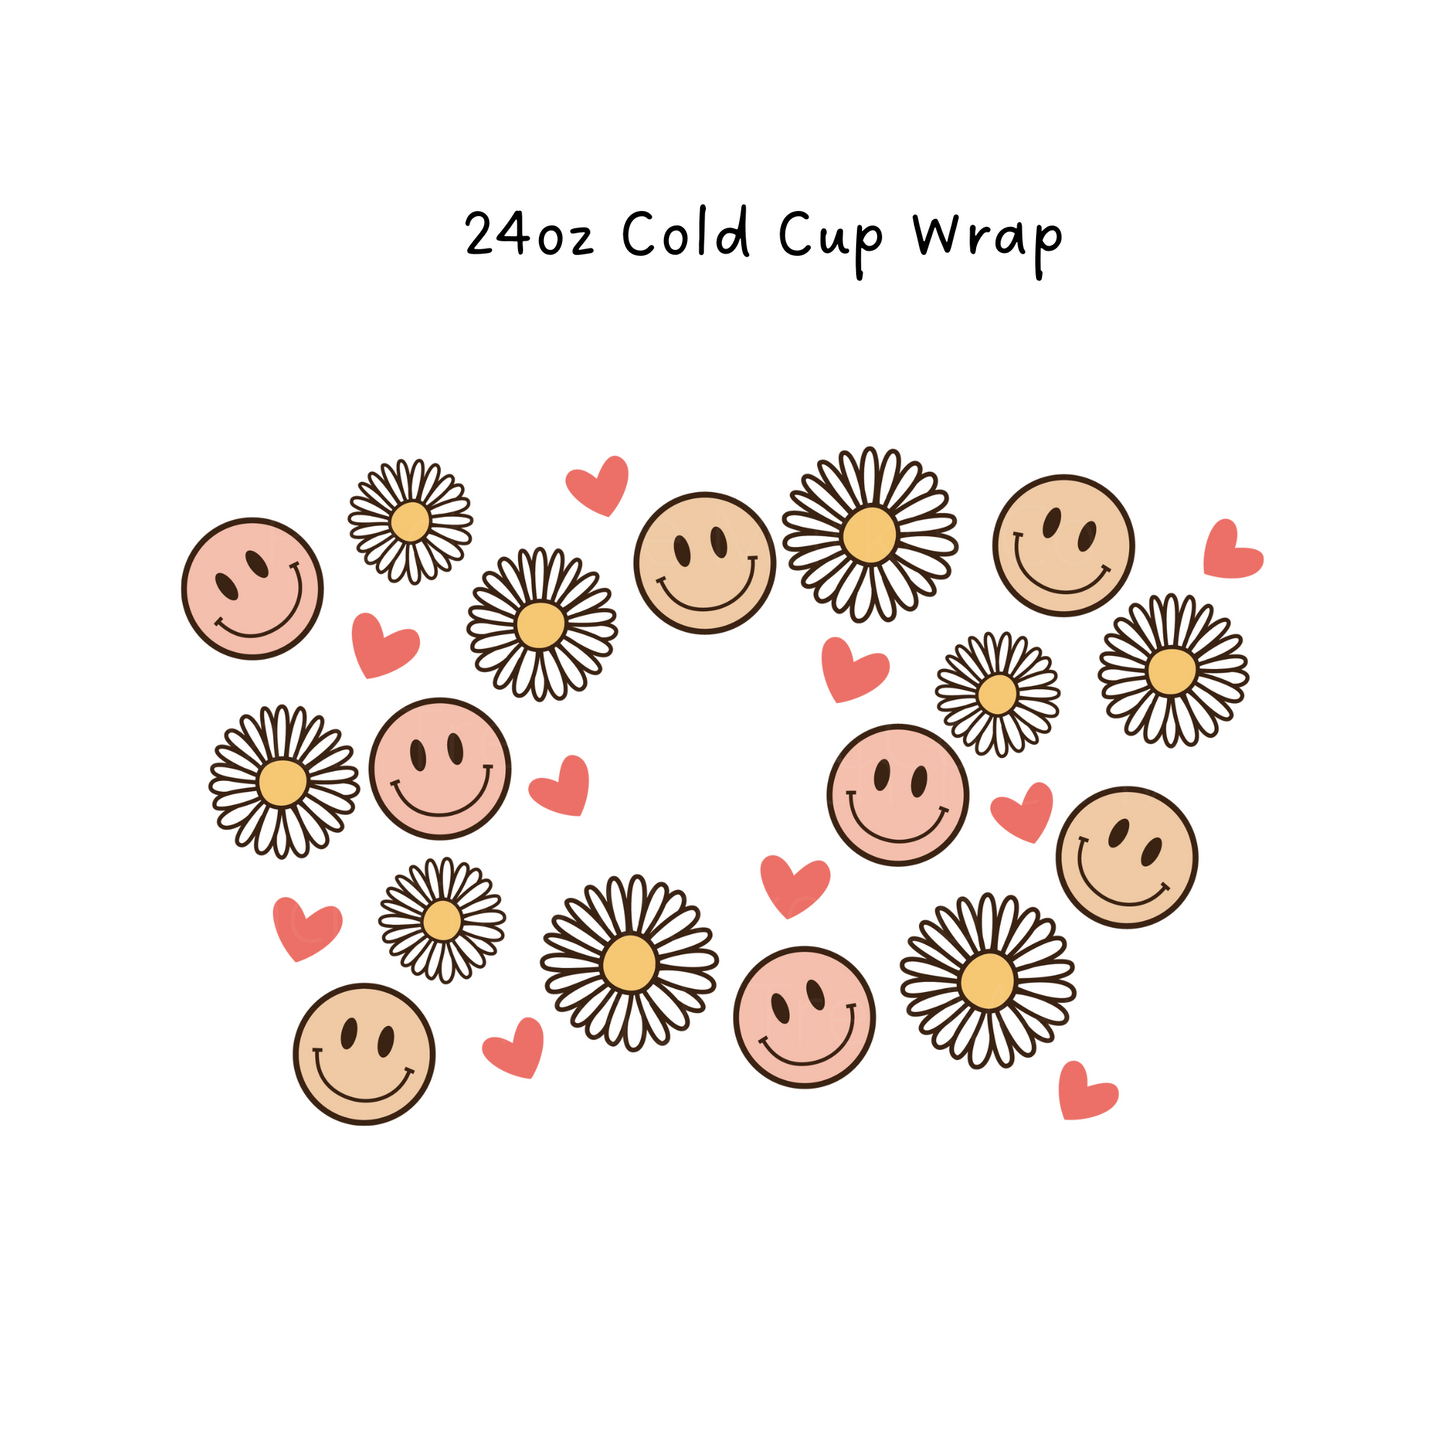 Flowers and Smile 24oz Cold Cup Wrap